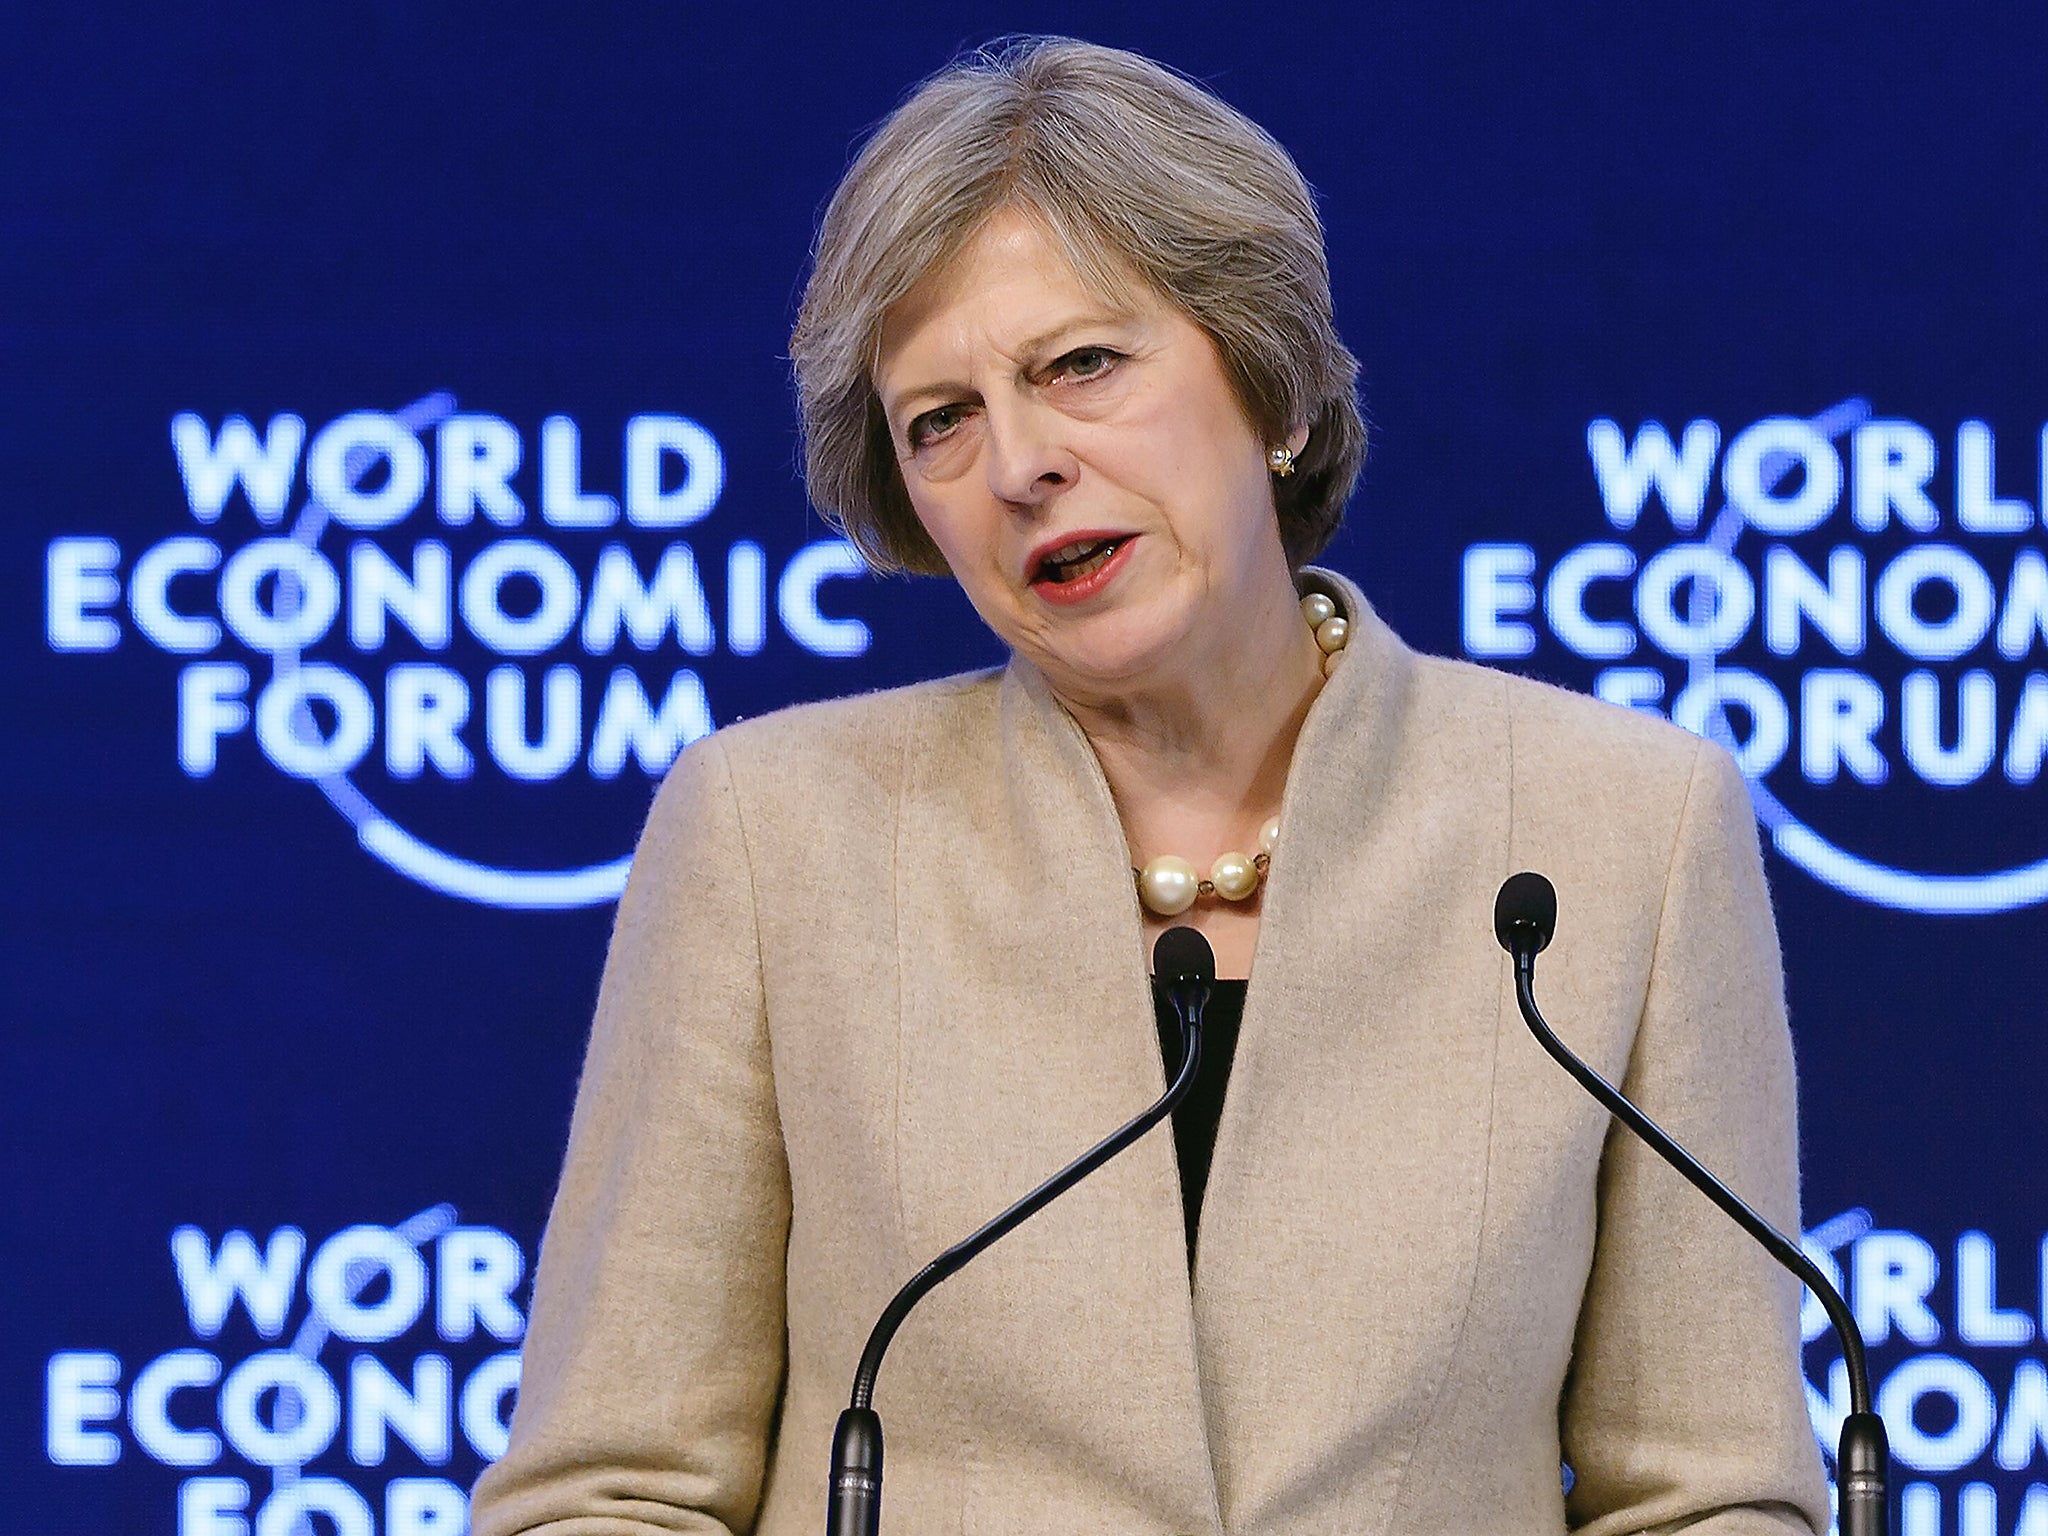 May has warned that she would walk out of the EU negotiations if a bad deal were on offer and change the UK’s economic model